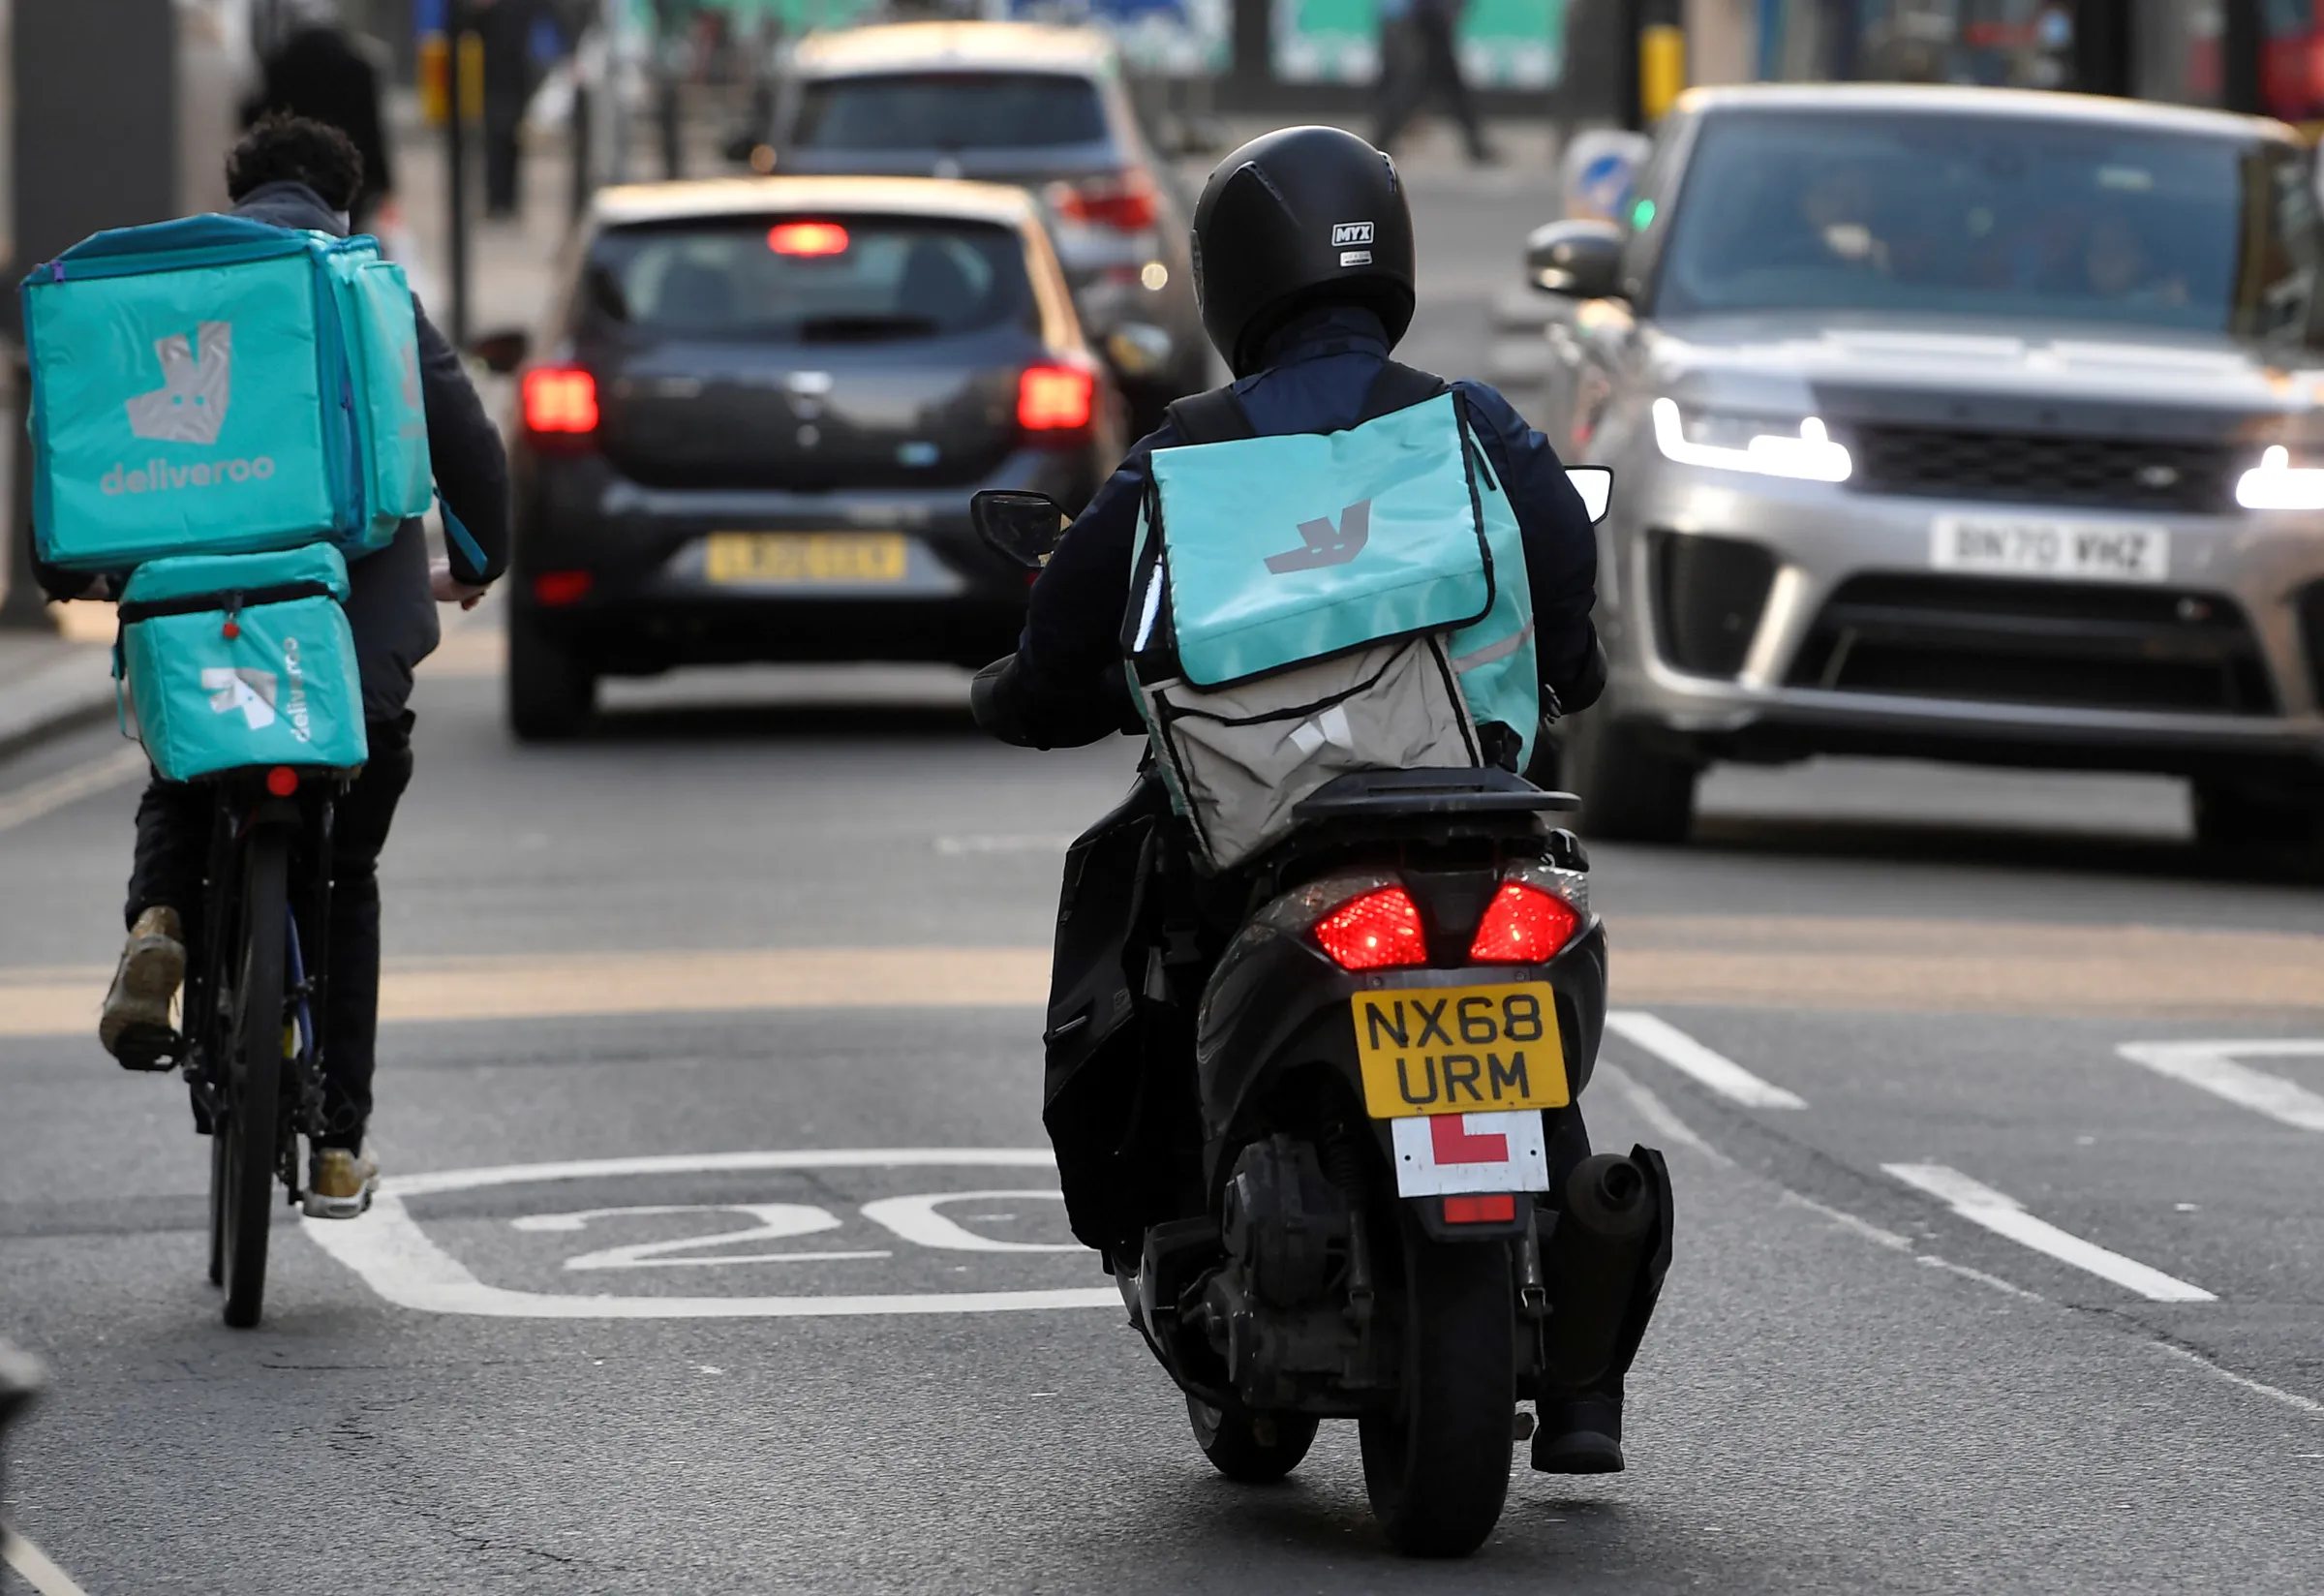 Deliveroo delivery workers ride in London, Britain, March 8, 2021